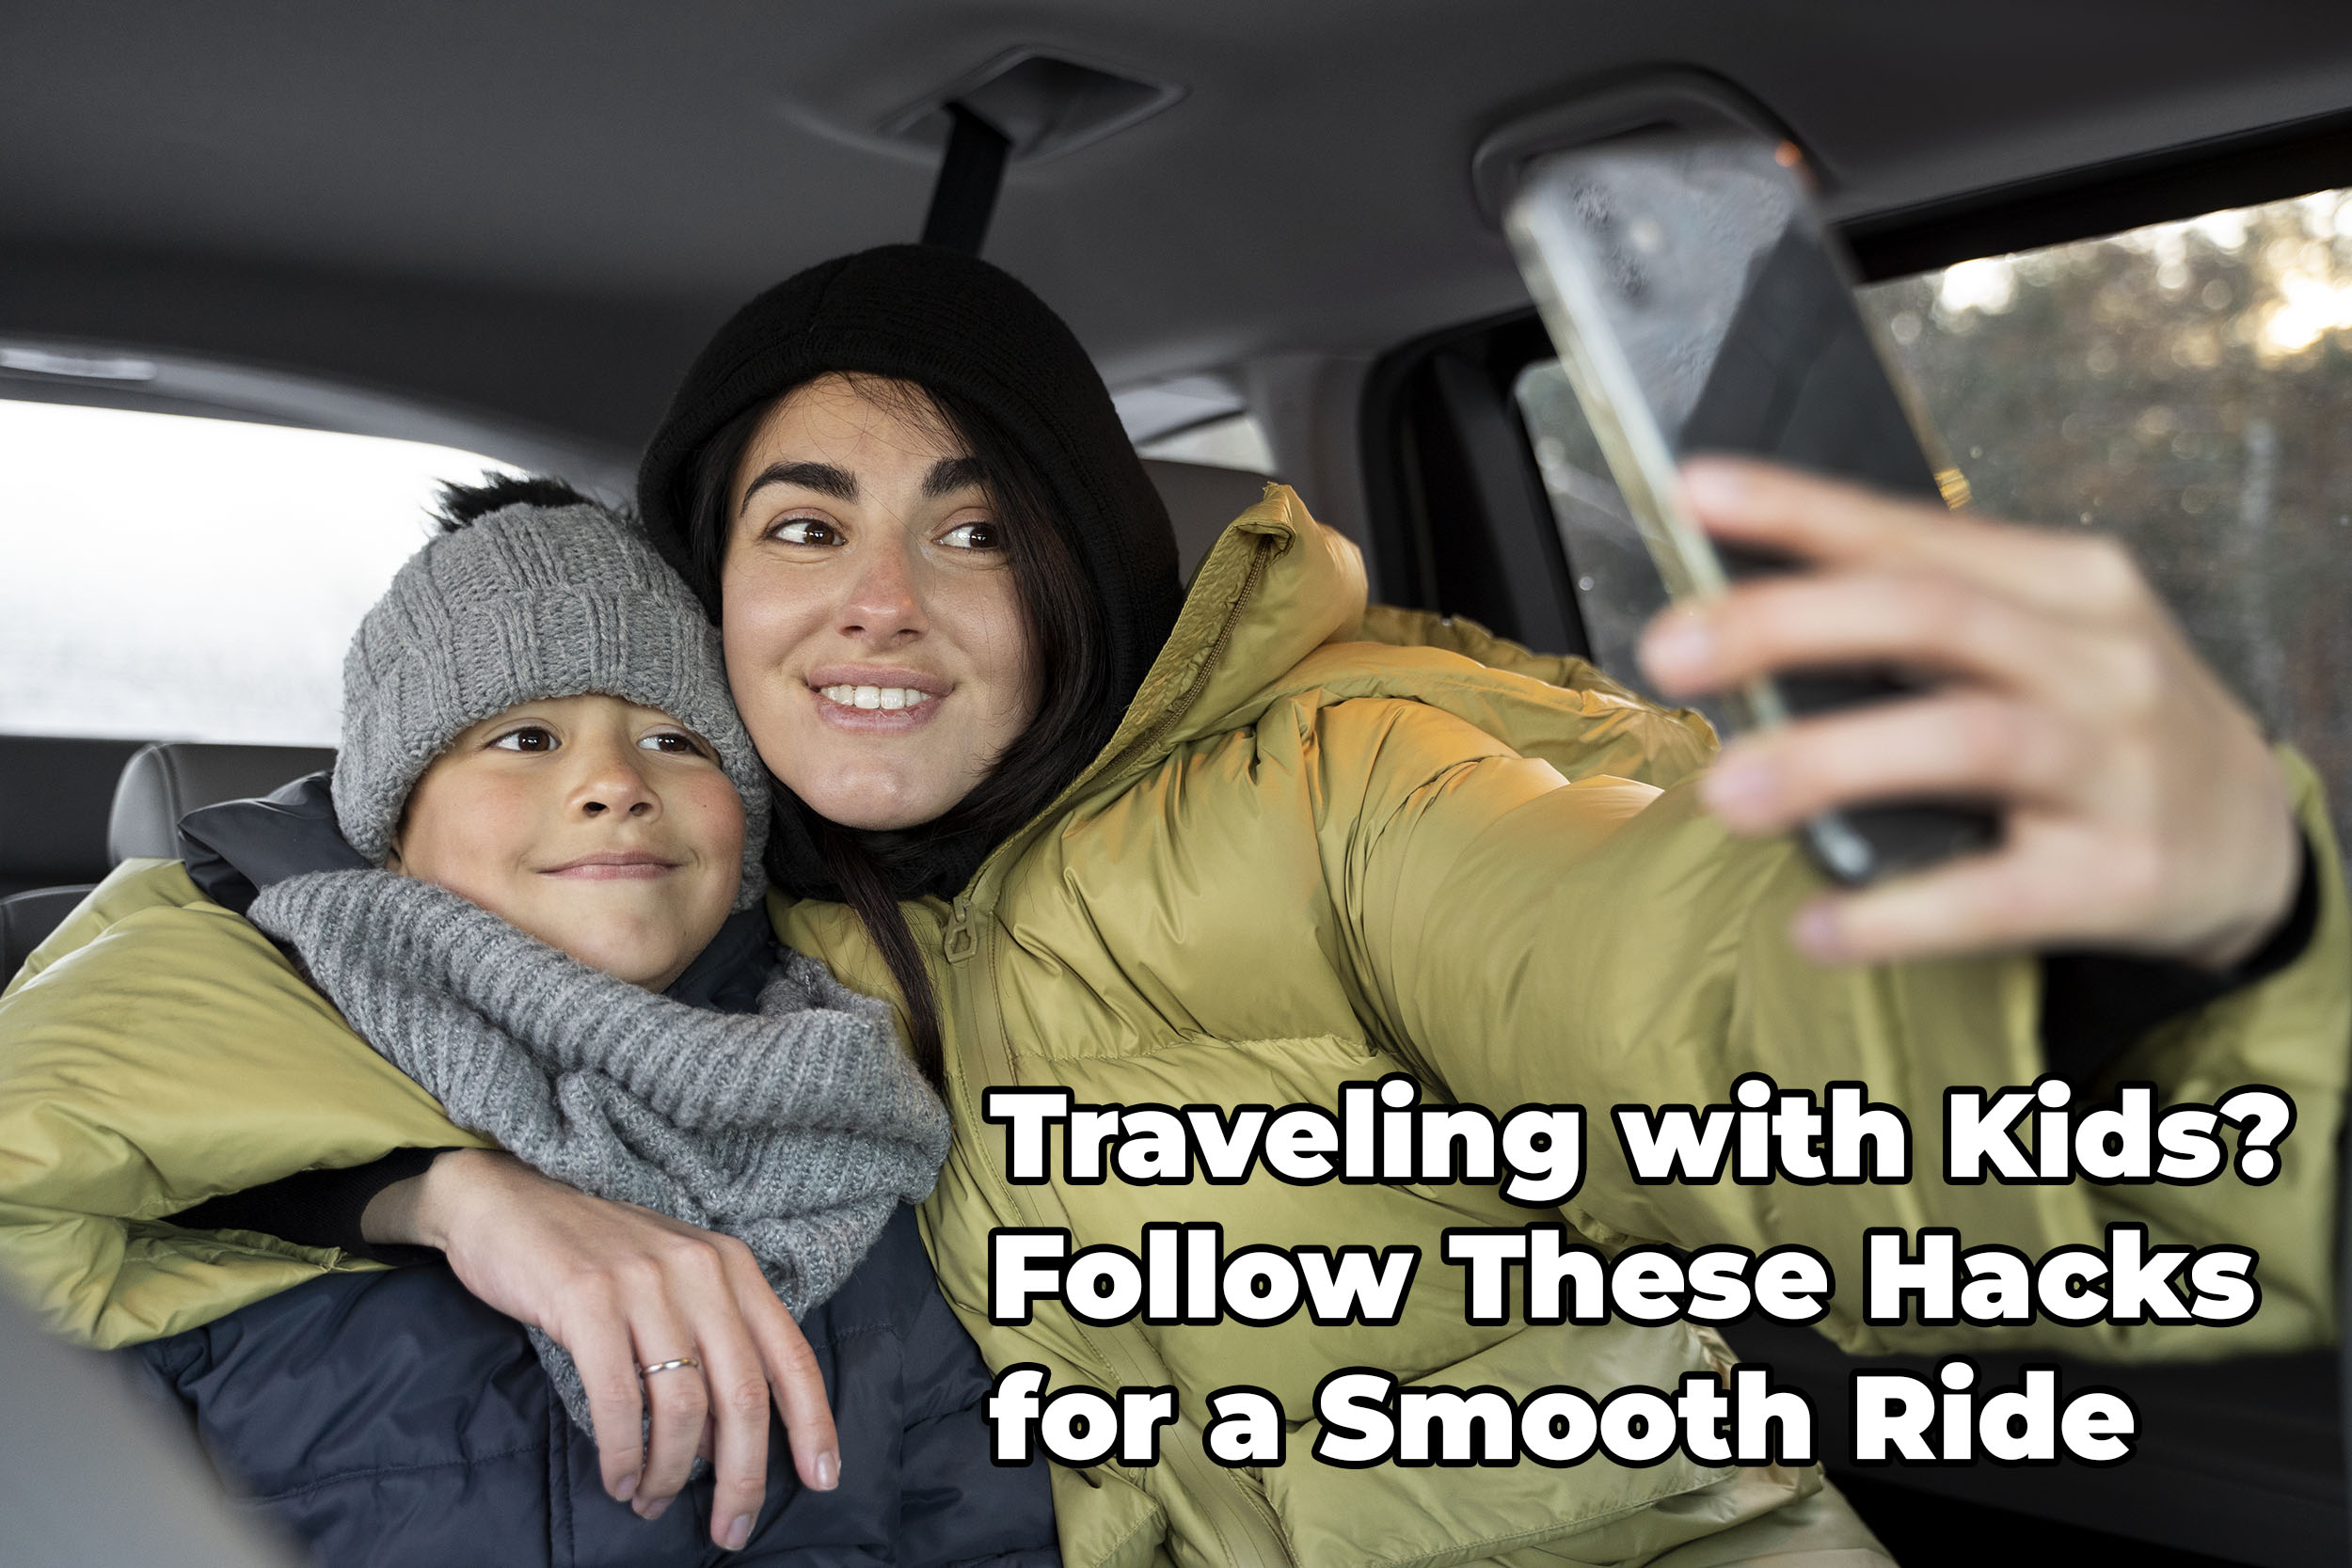 How Can You Travel Safely And Happily In Taxi With Kids In Utreg?